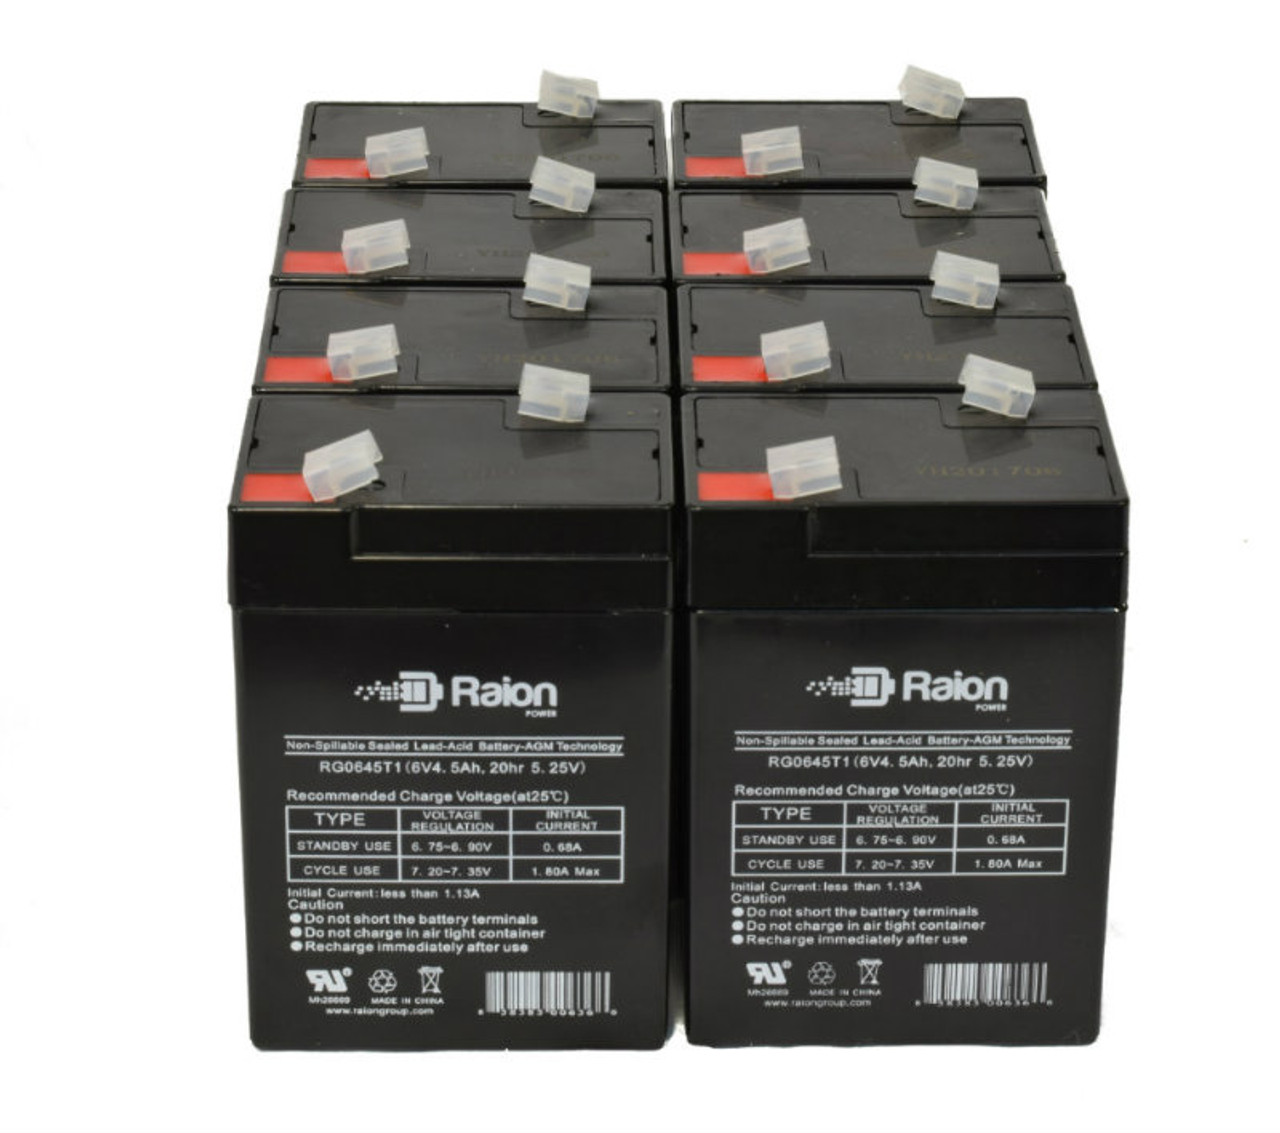 Raion Power 6V 4.5Ah Replacement Emergency Light Battery for Dual Lite 0120255 - 8 Pack